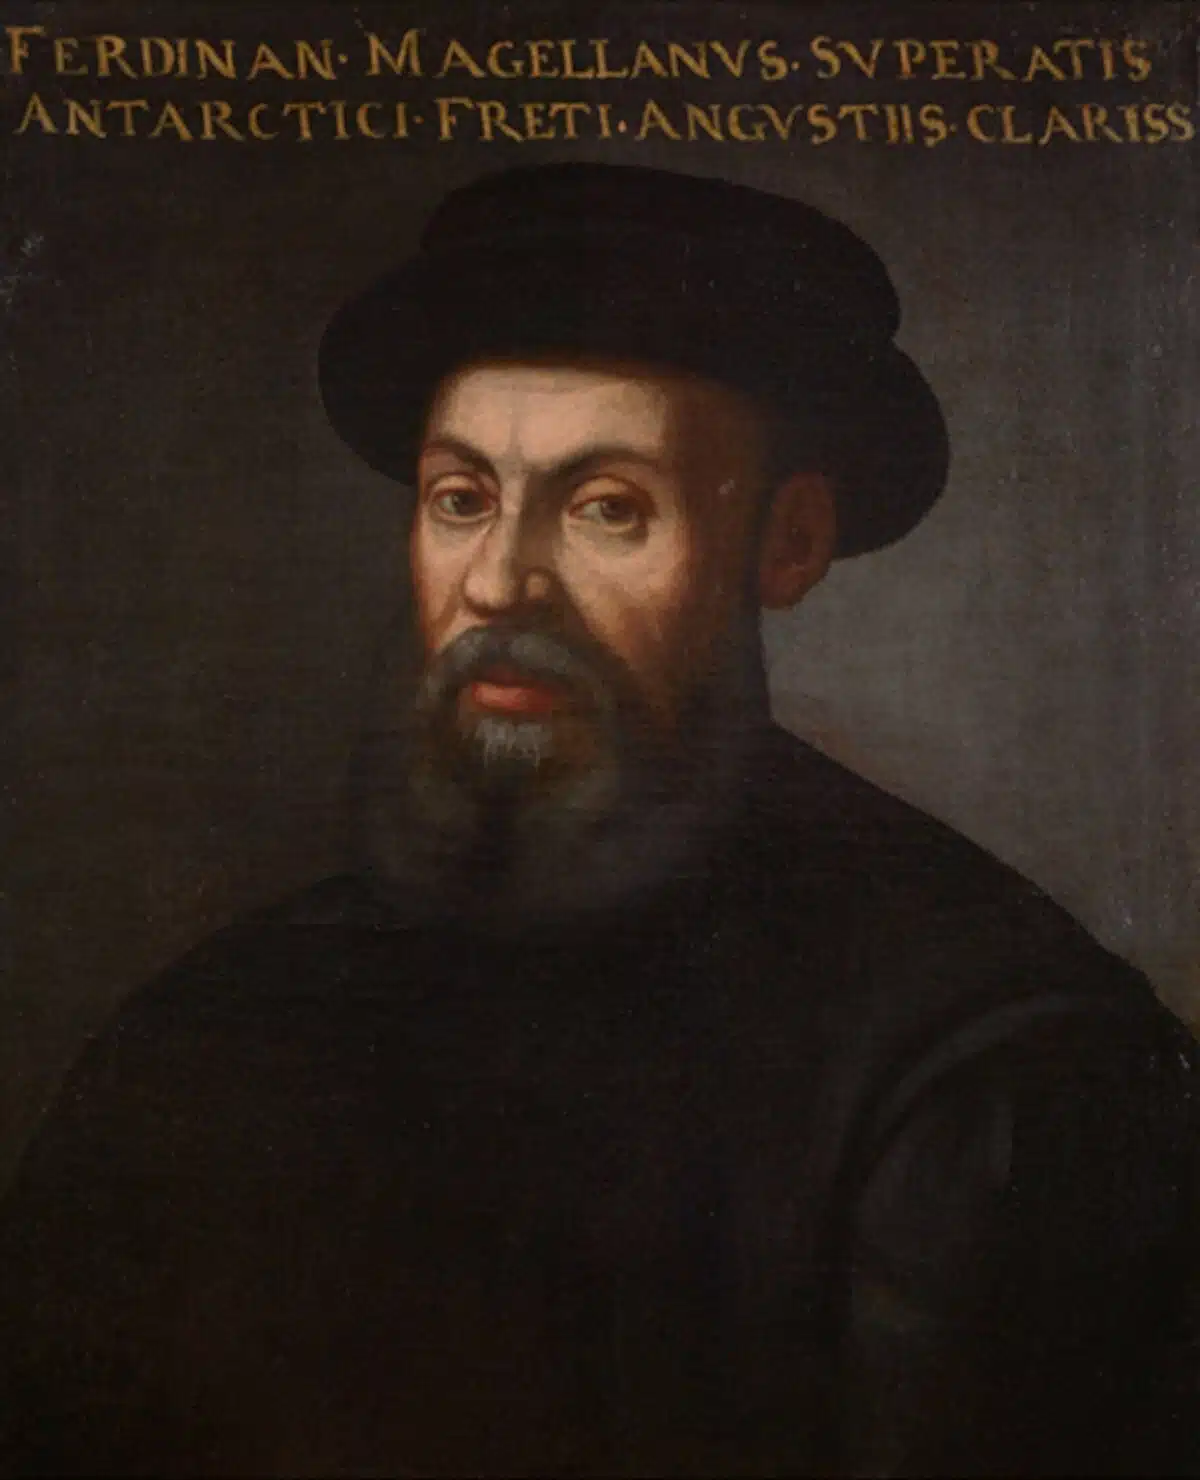 Ferdinand Magellan was another famous explorer from Portugal to make his name in the 15th century.